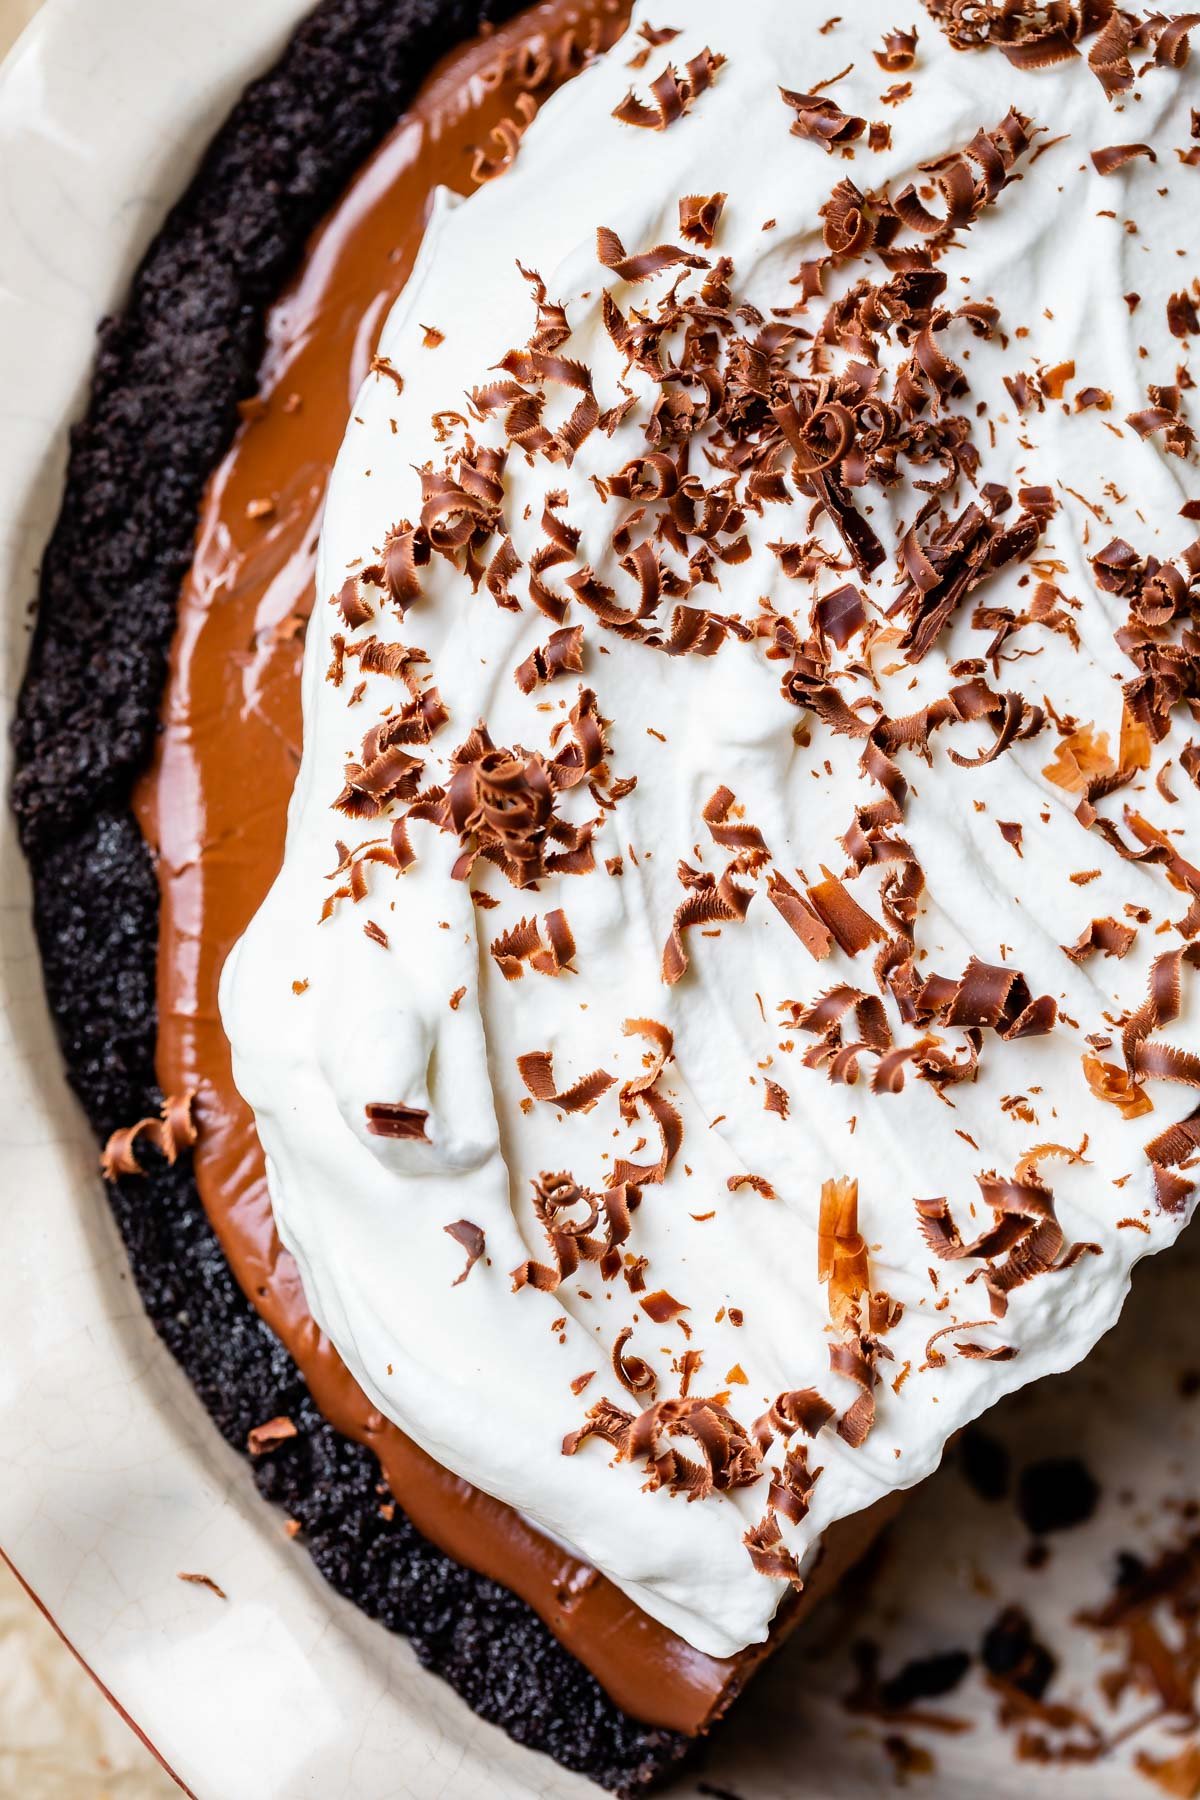 whipped cream topped chocolate cream pie with chocolate shavings.